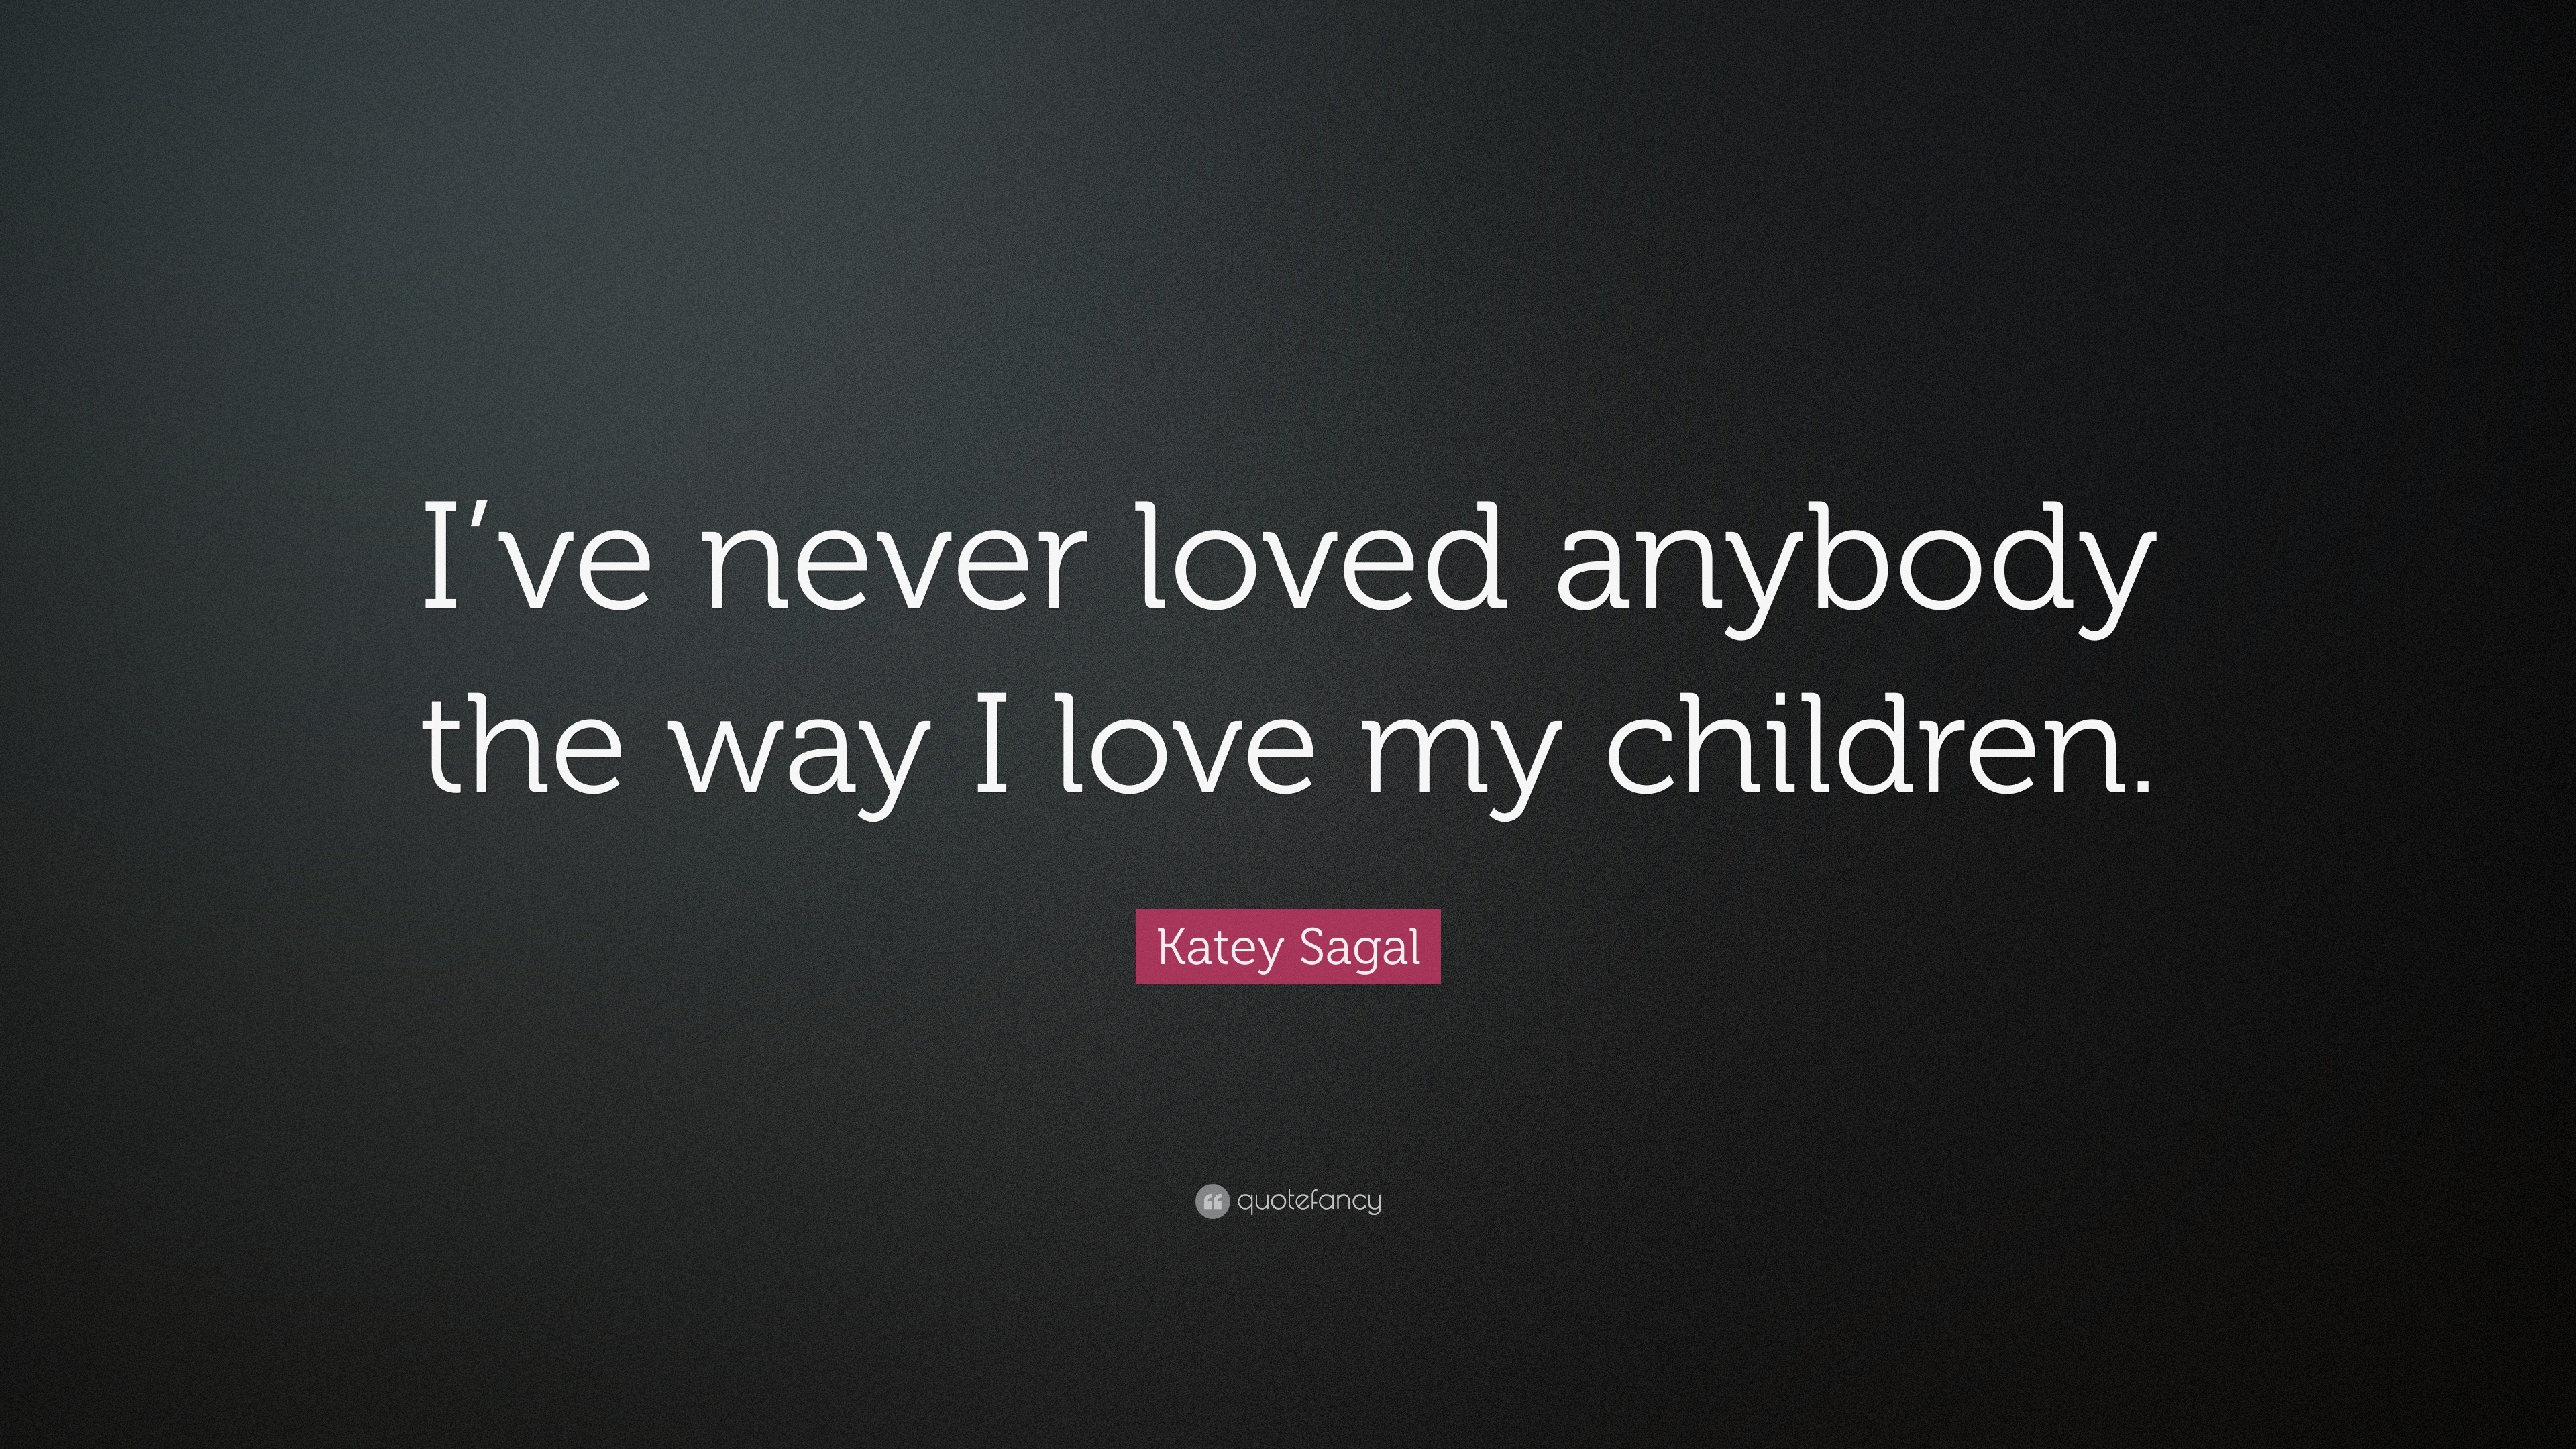 Katey Sagal Quote “I ve never loved anybody the way I love my